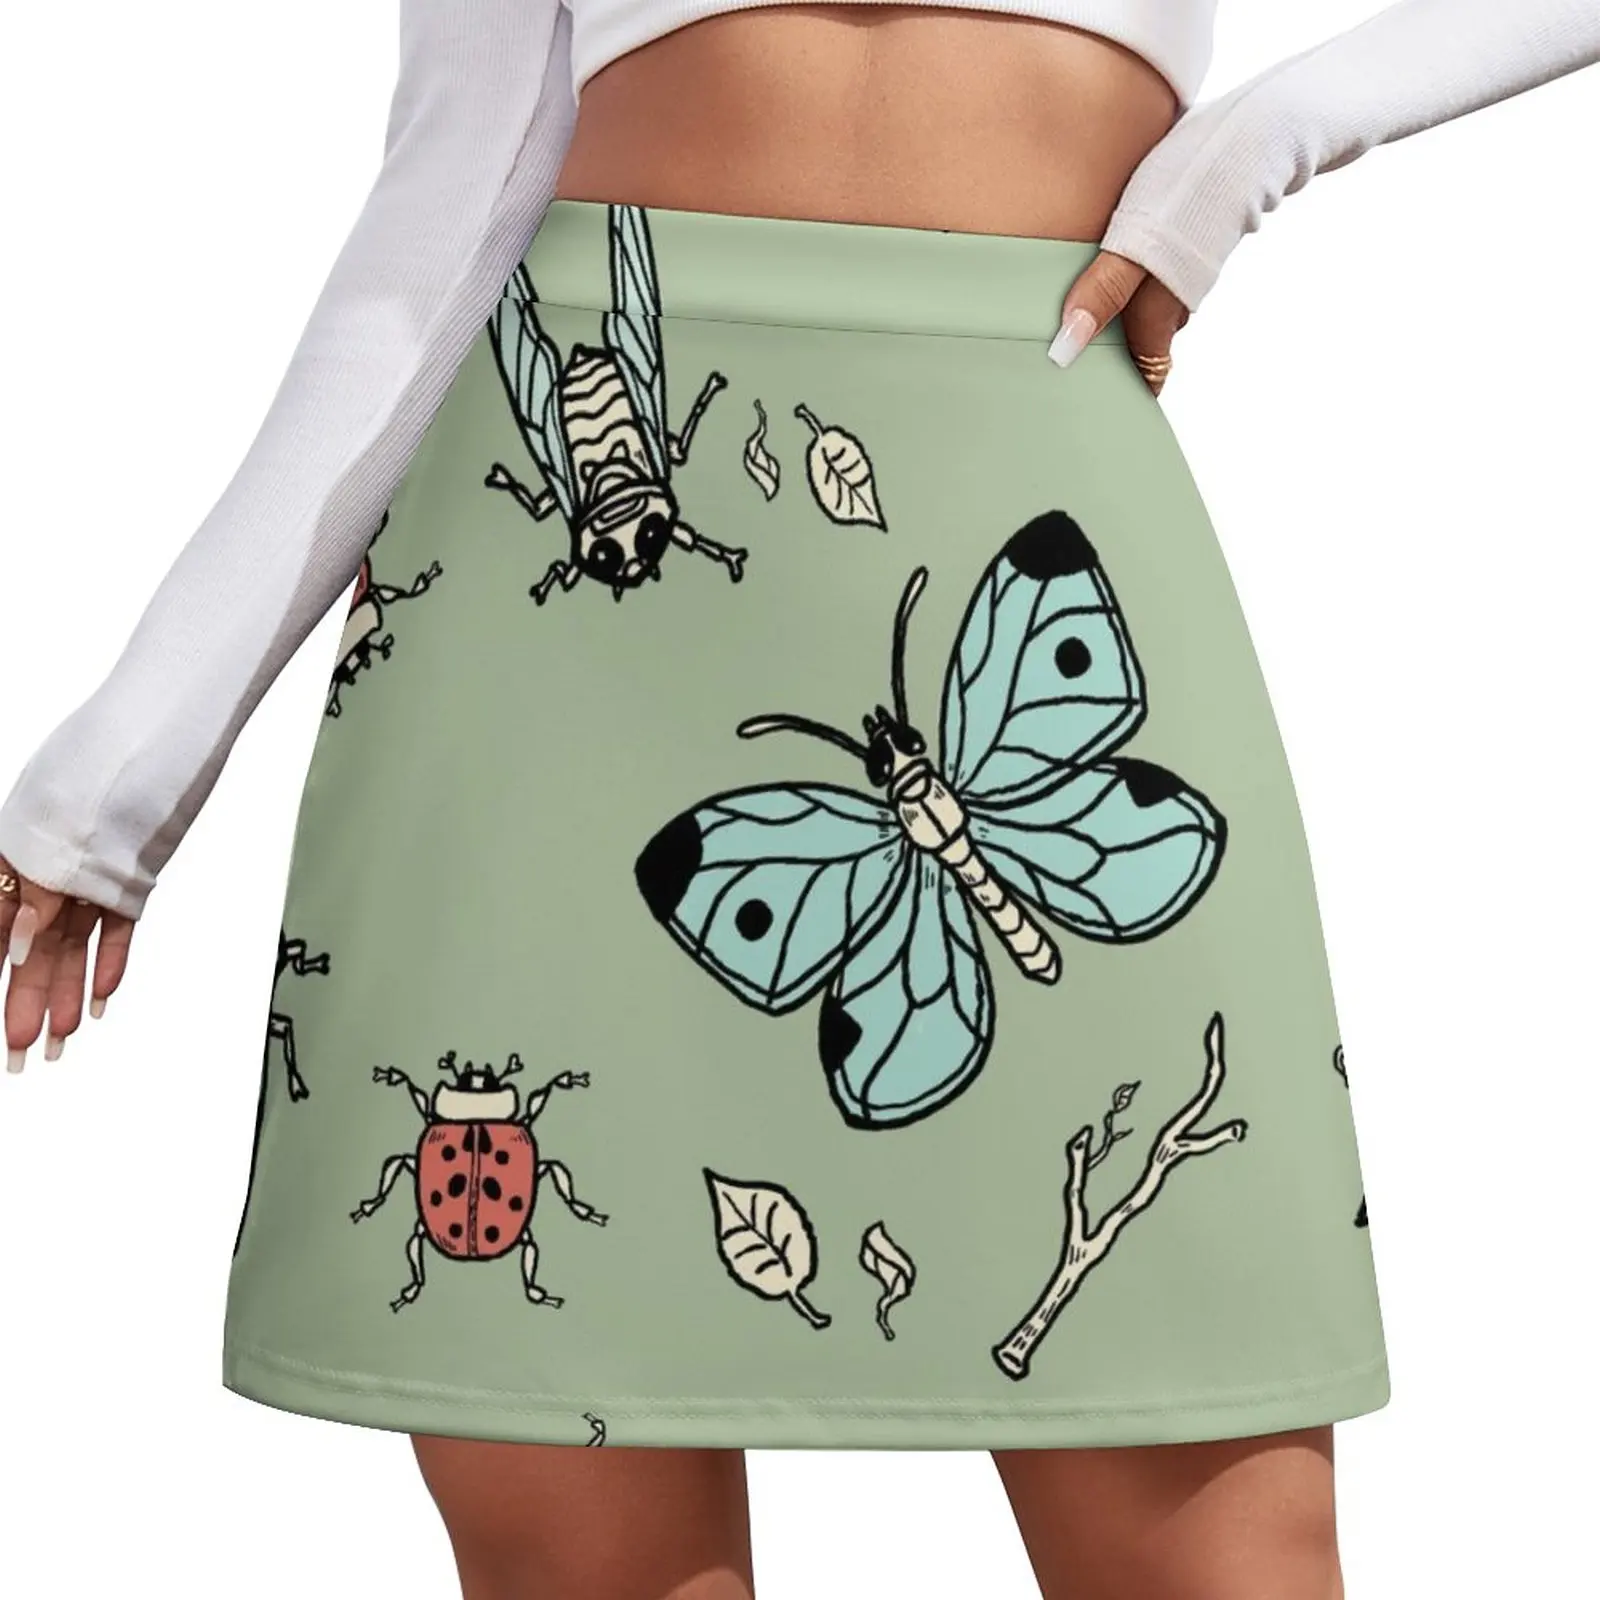 I'll Fck you Up if you're Mean to Bugs Mini Skirt Woman skirt Skirt for girls womens clothing